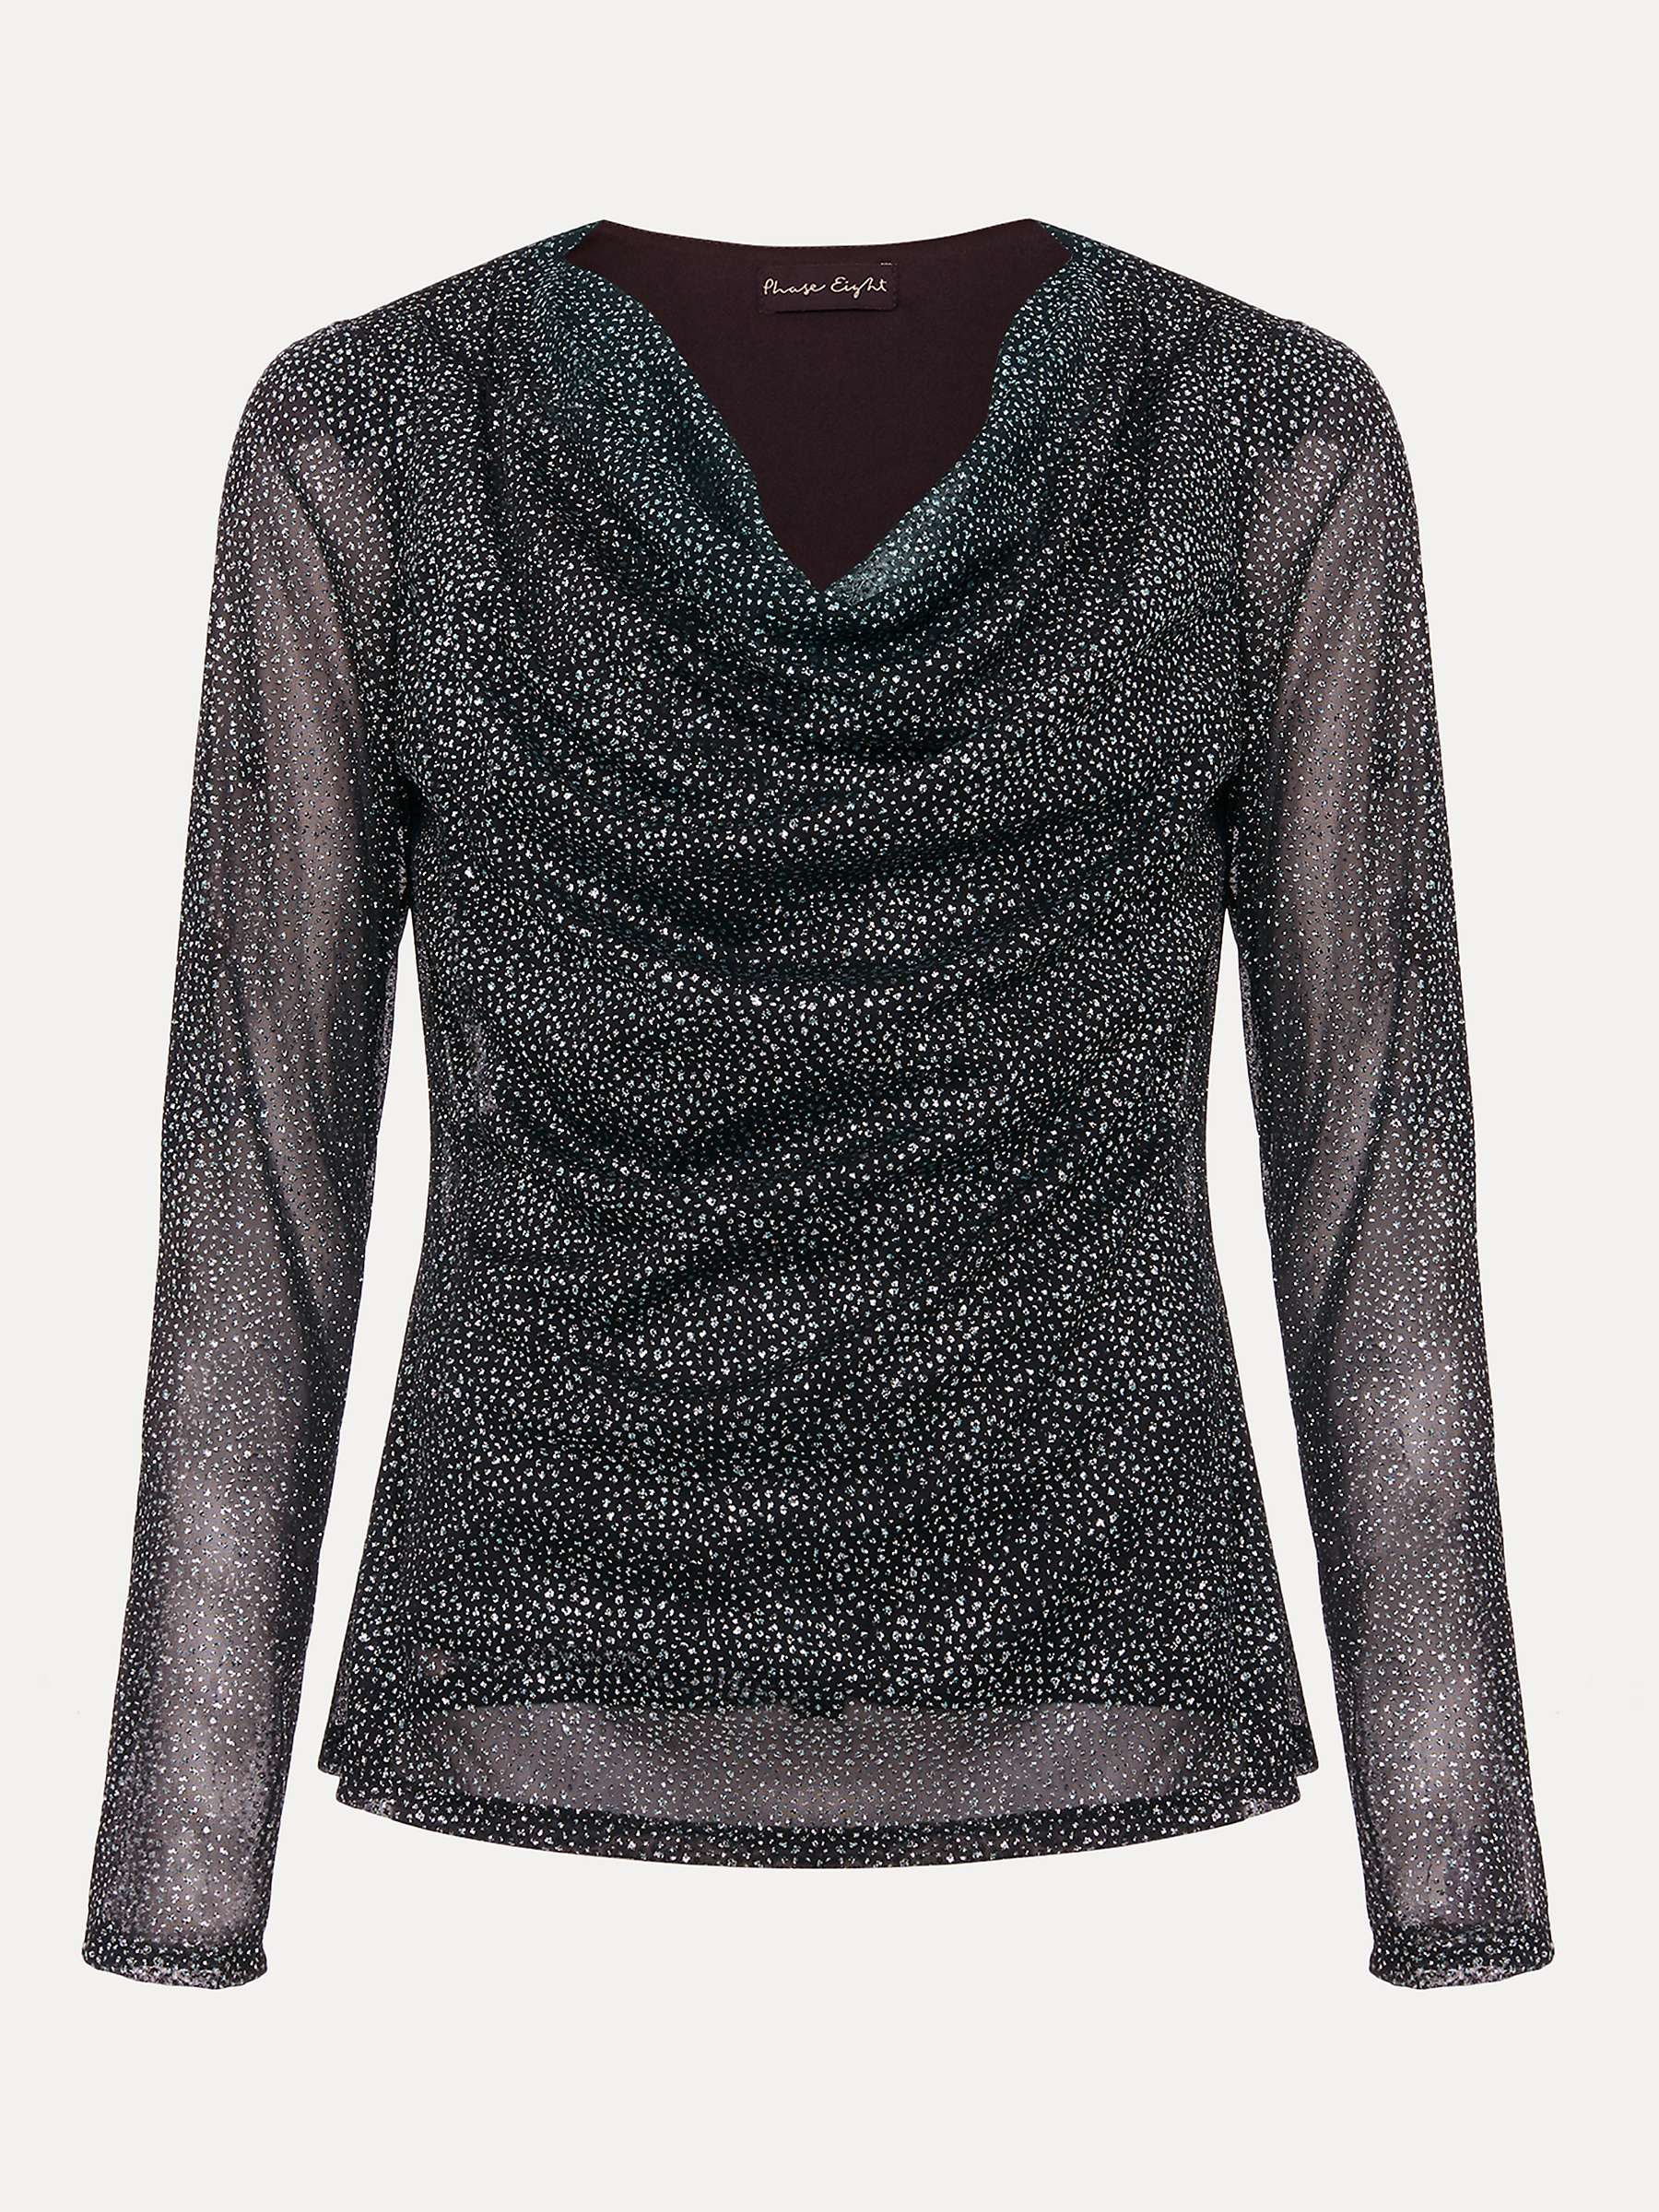 Buy Phase Eight Sera Shimmer Cowl Neck Top, Teal Online at johnlewis.com